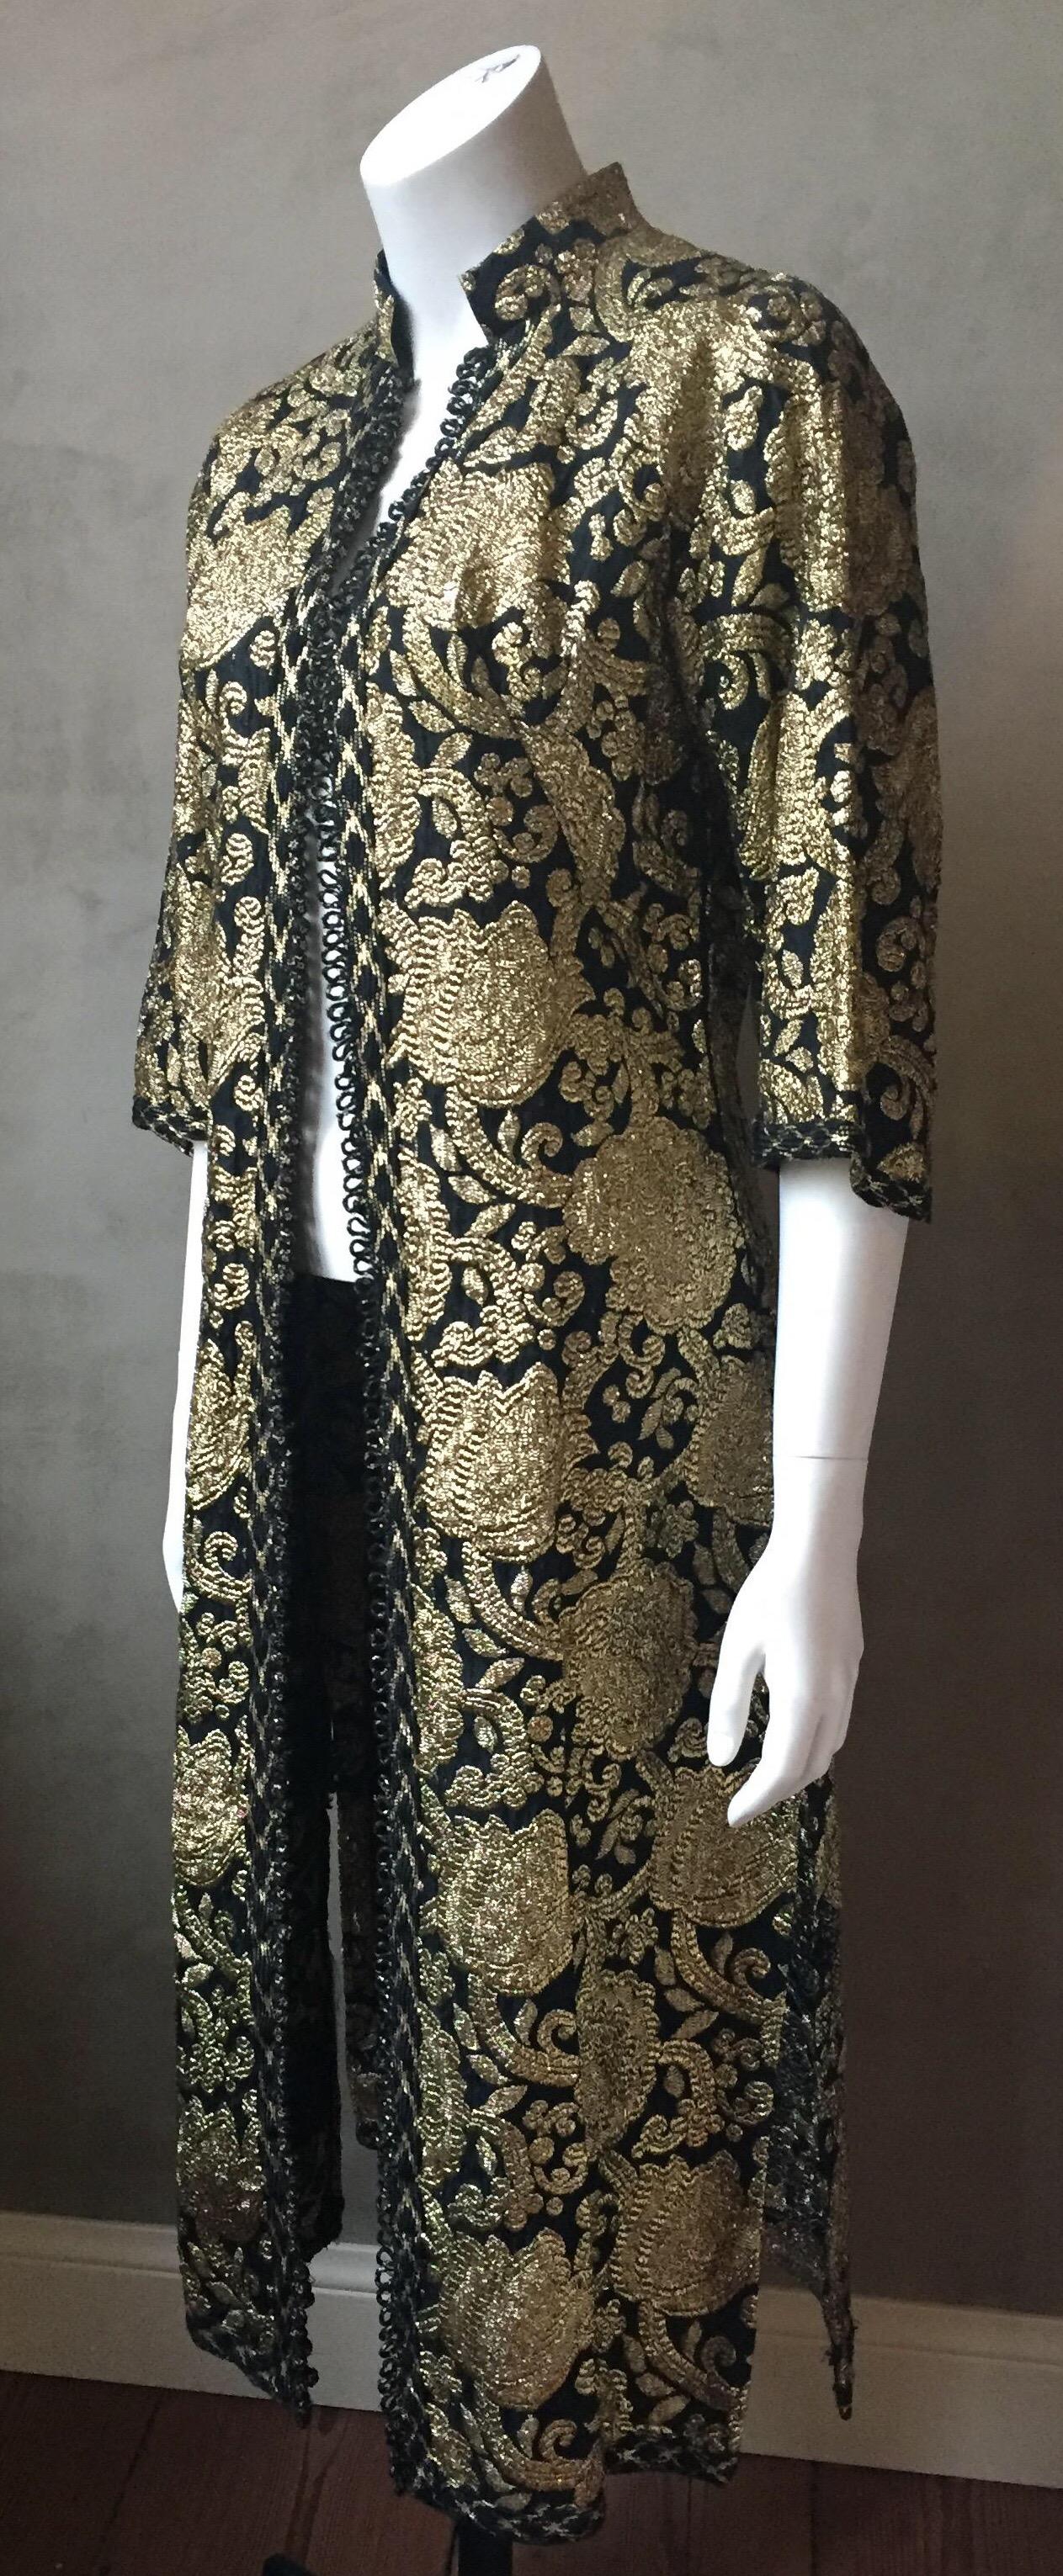 A vintage Turkish style gold and black brocade dress or evening jacket. Tiny knot buttons all the way down the front and a side zipper allow the dress to be worn completely closed when worn as a dress, or button the top half and leave from waist